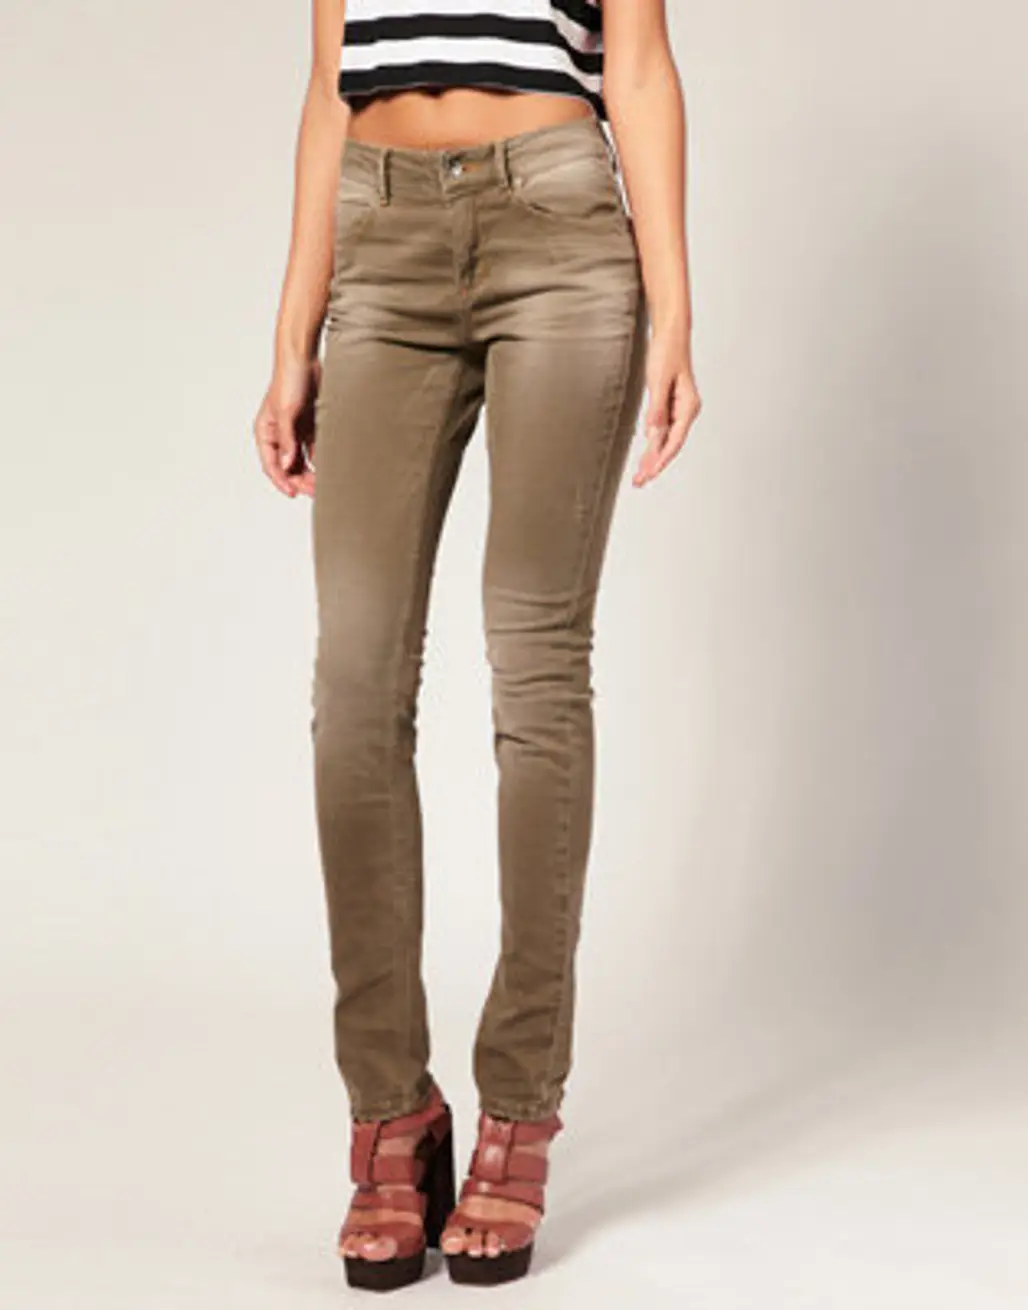 Selected Femme Skinny Washed out Jean